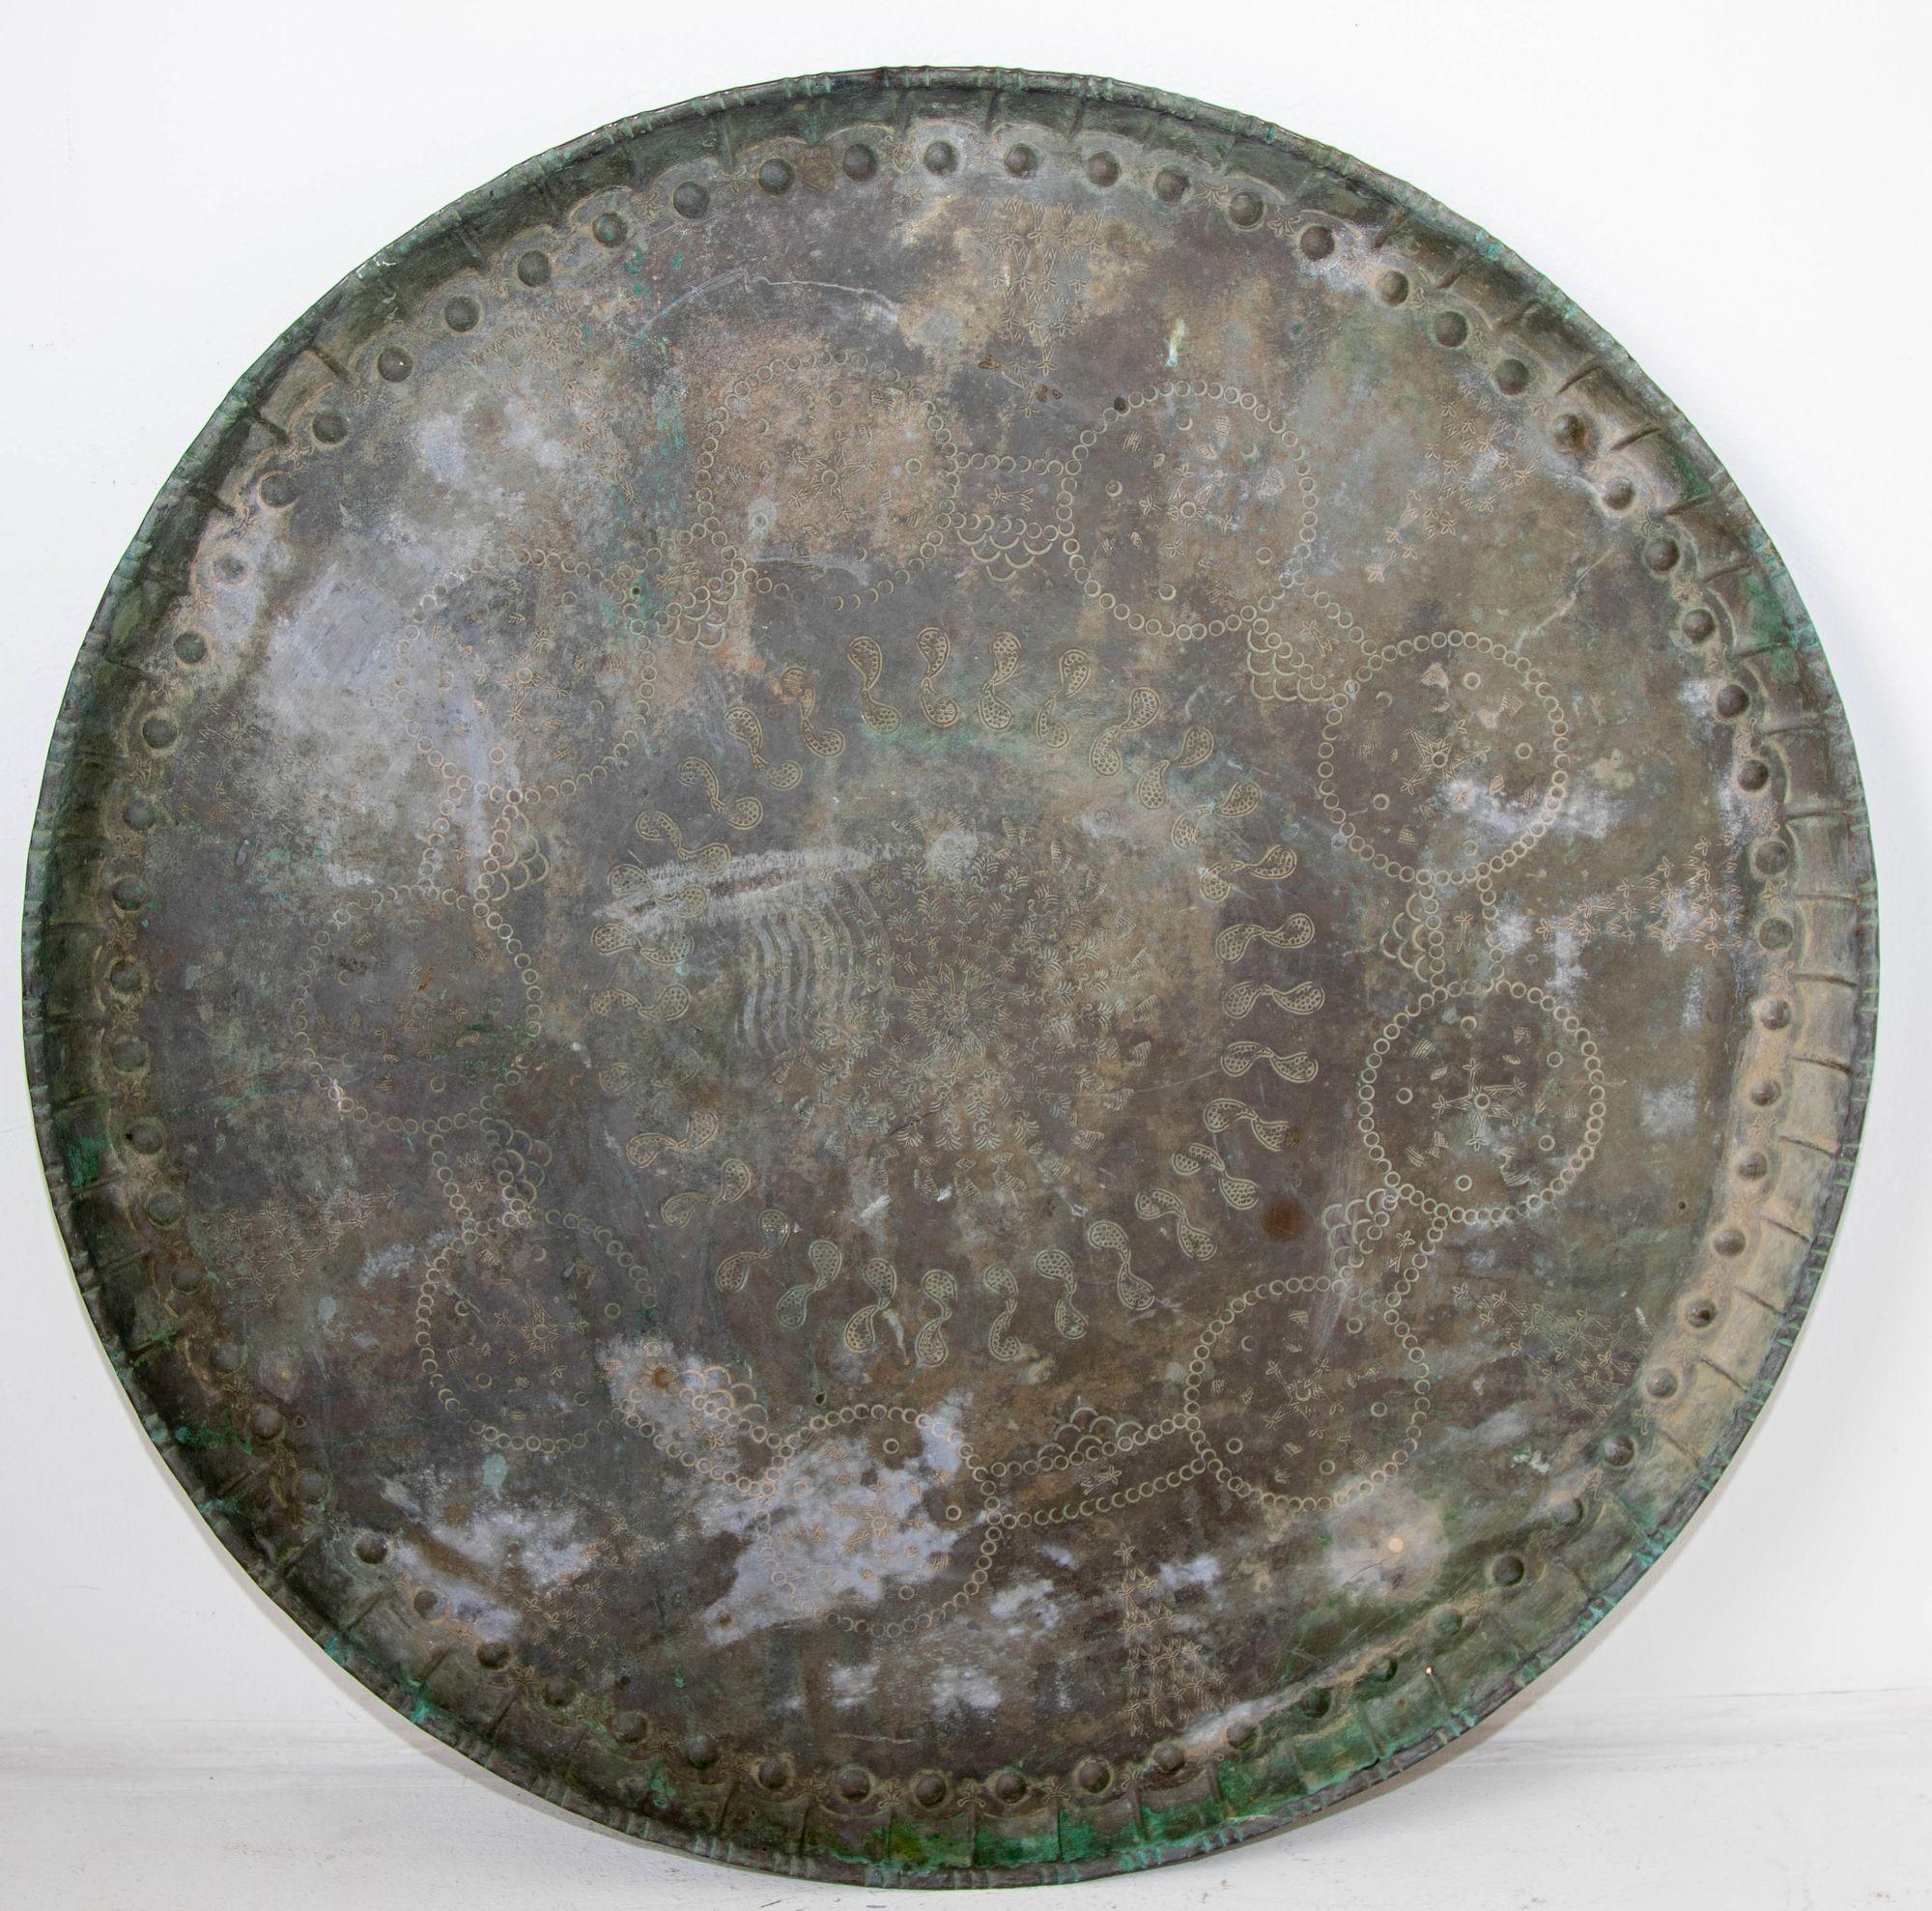 Antique monumental Asian Turkish tinned copper round metal tray.
Large heavy Persian Islamic style tinned copper tray, late 19th century.
A large-scale 19th century Asian Moorish Turkish Persian tin copper round tray platter.
Antique Turkish